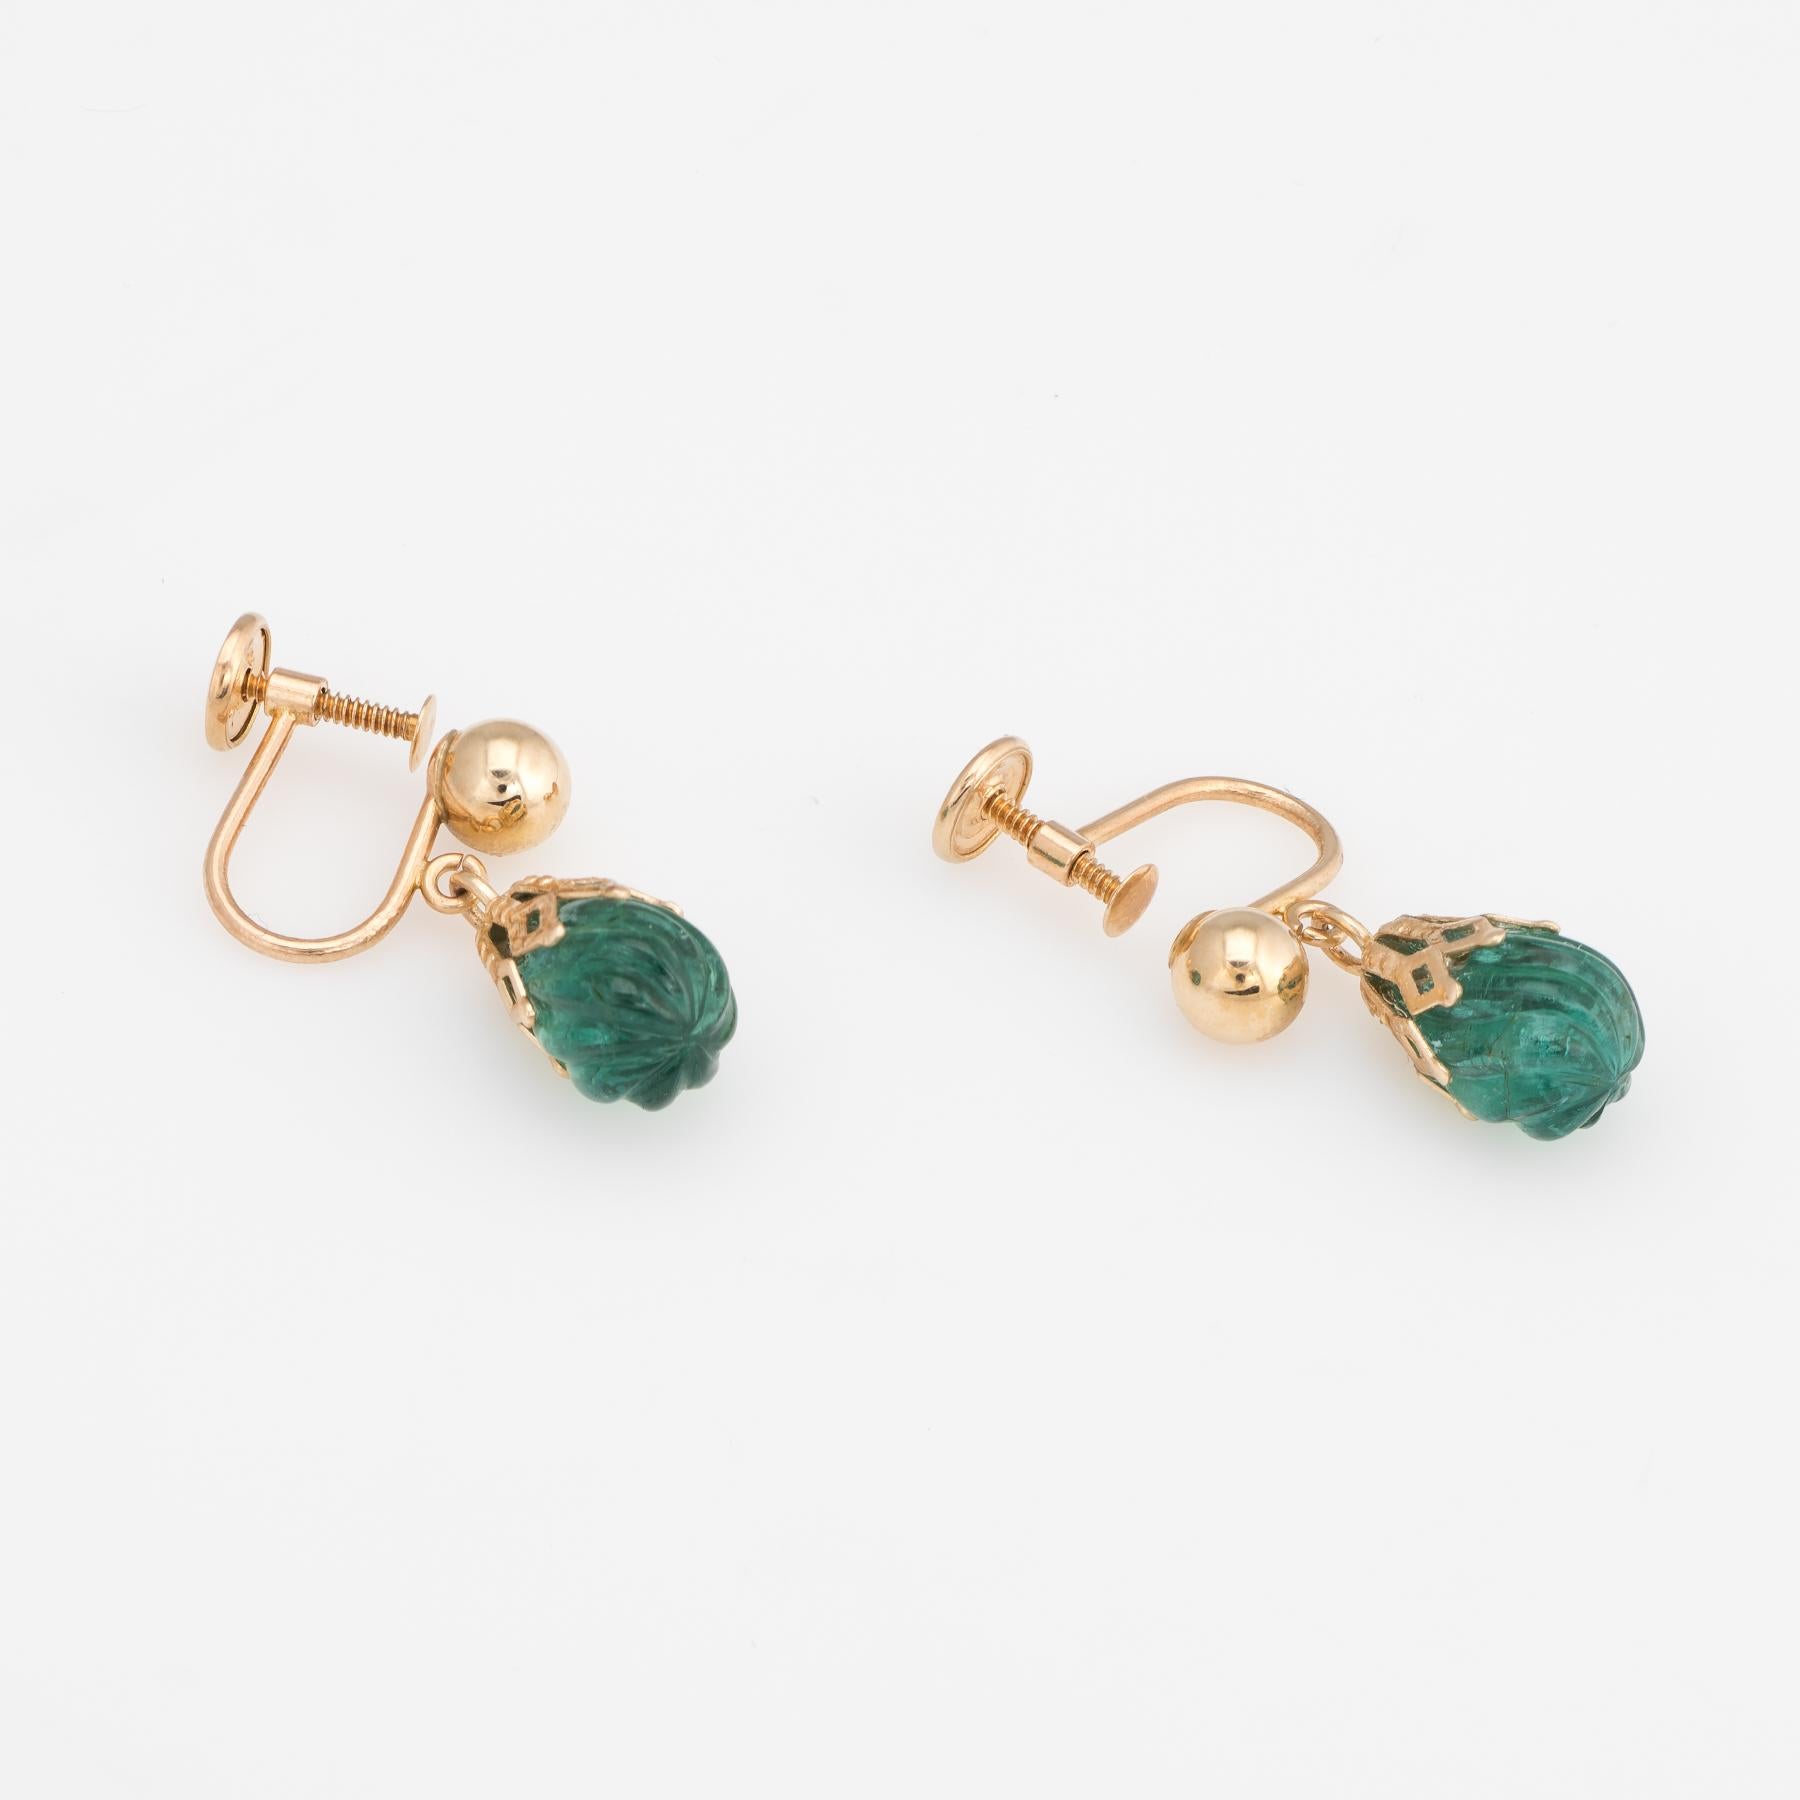 Elegant pair of vintage earring drops, crafted in 14k yellow gold. 

Fluted emeralds measure 10mm x 6.5mm. The emeralds are fluted with a slight twist. 

The gemstones are each securely set into triangular basket mounts. The earrings offer a nice